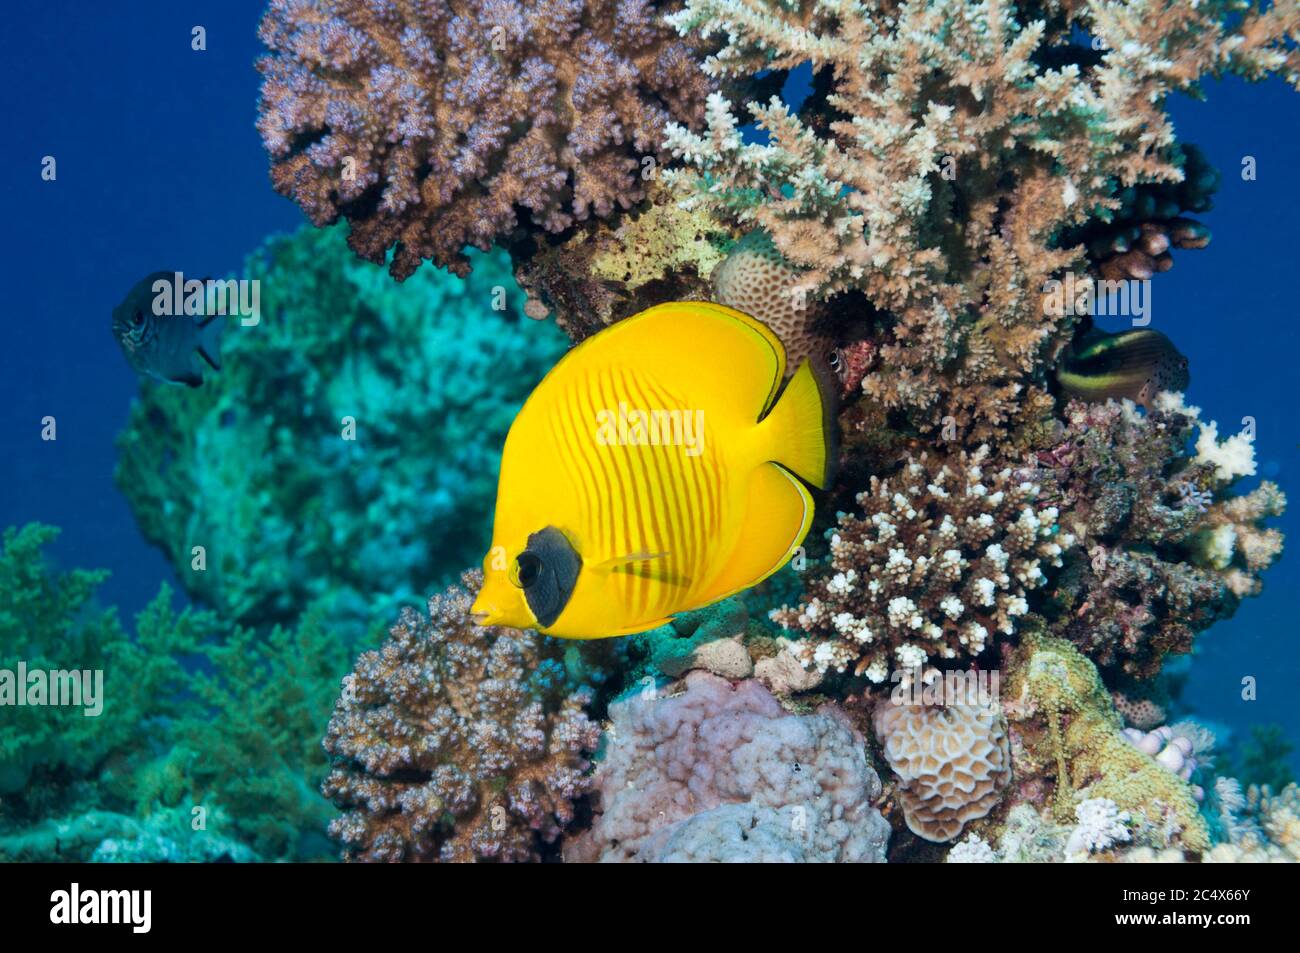 Golden butterflyfish (Chaetodon semilarvatus).  Found in the Red Sea and Gulf of Aden.  This species is one of the few fish species to have longterm m Stock Photo